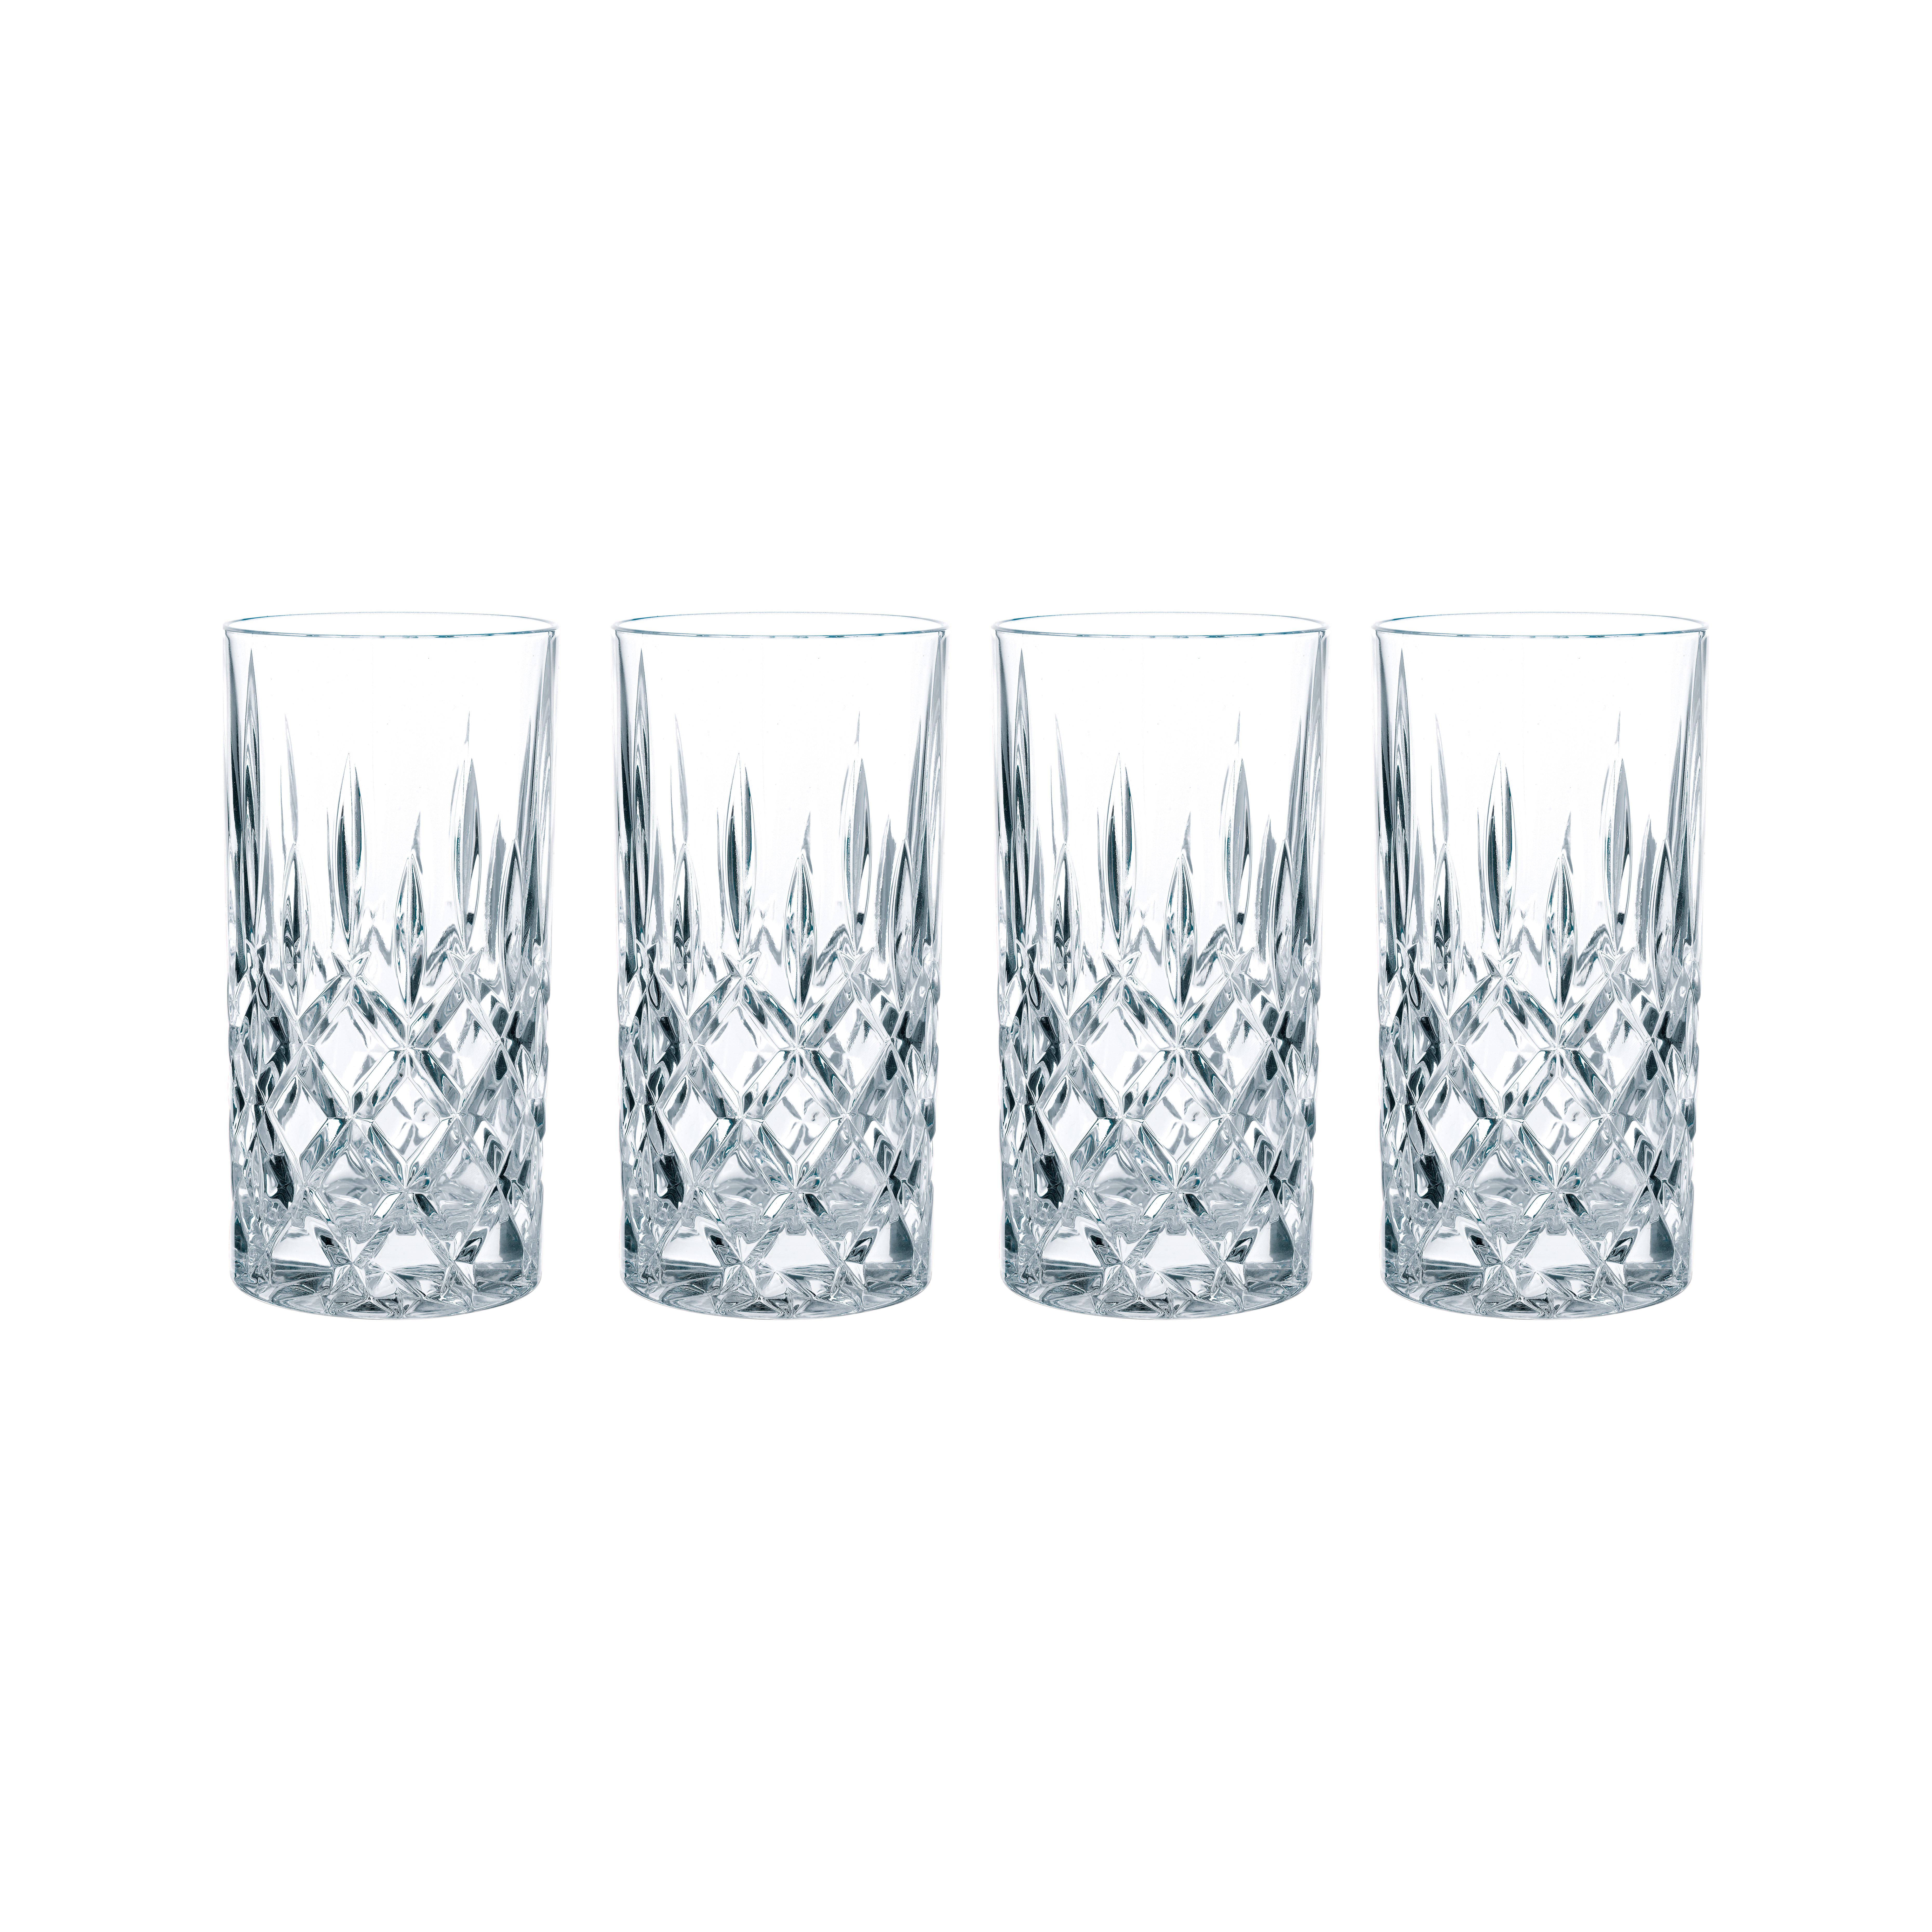 5x Crystal LONG DRINK GLASSES Heavy High Ball Glasses Old 